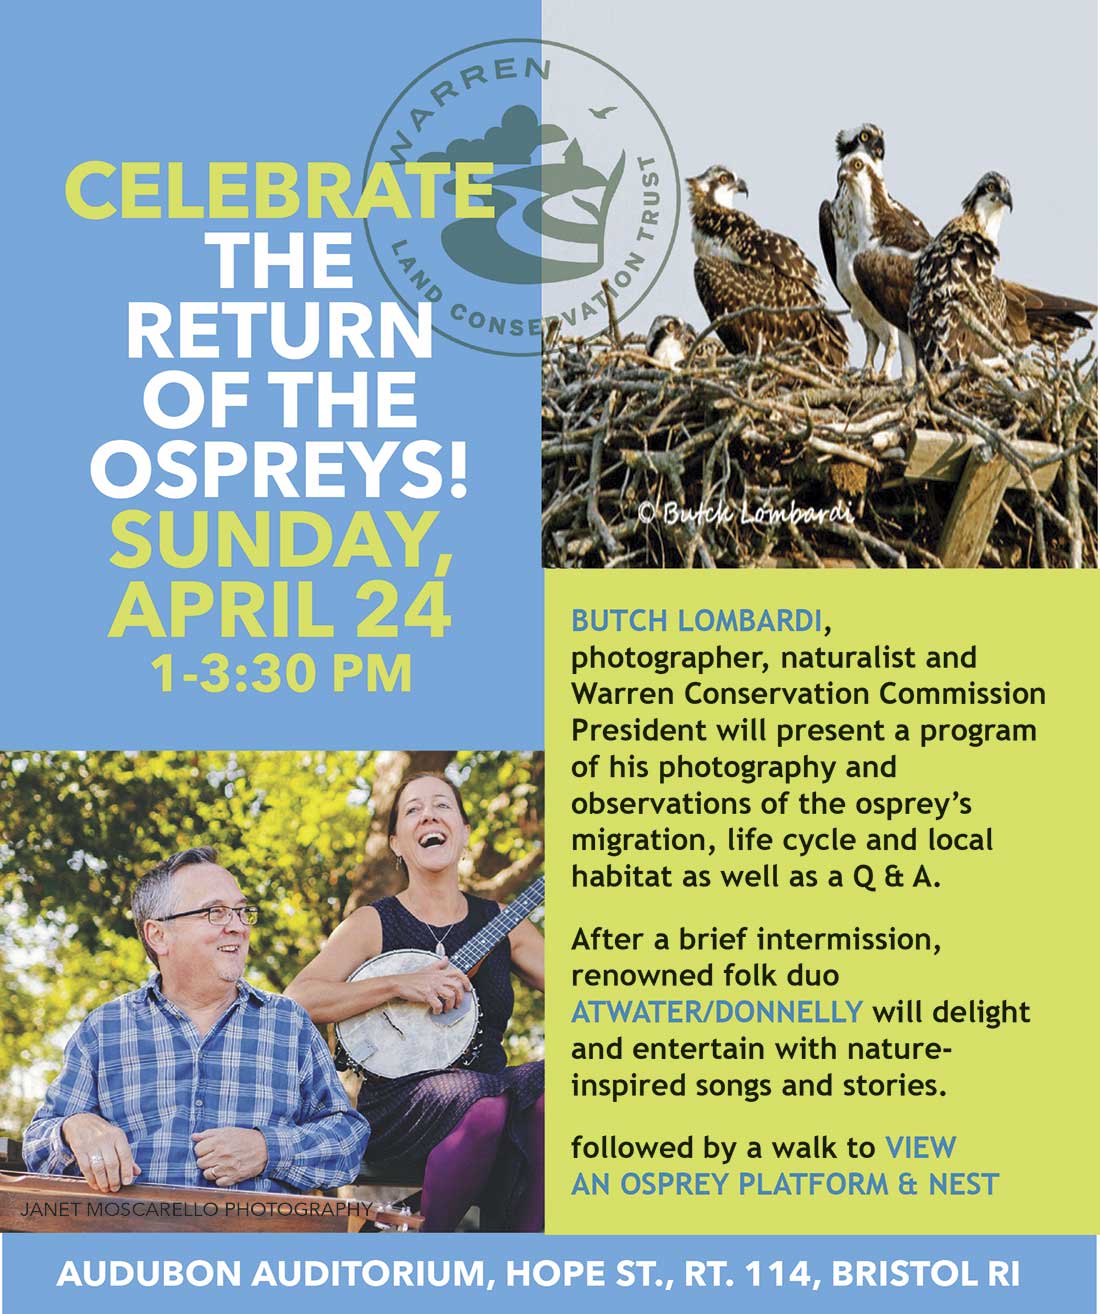 1 to 3:30pm. Butch Lomardi, photographer, naturalist and Warren Conservation Commission President will present a program of his photography and observation of the osprey's migration, life cycle and local habitat as well as a Q&amp;A. After a brief intermission renowned folk duo Atwater/Donnelly will delight and entertain with nature-inspired songs and stories. Followed by a walk to view an osprey platform &amp; nest. Audubon Auditorium, Hope Street, Route 114, Bristol, RI